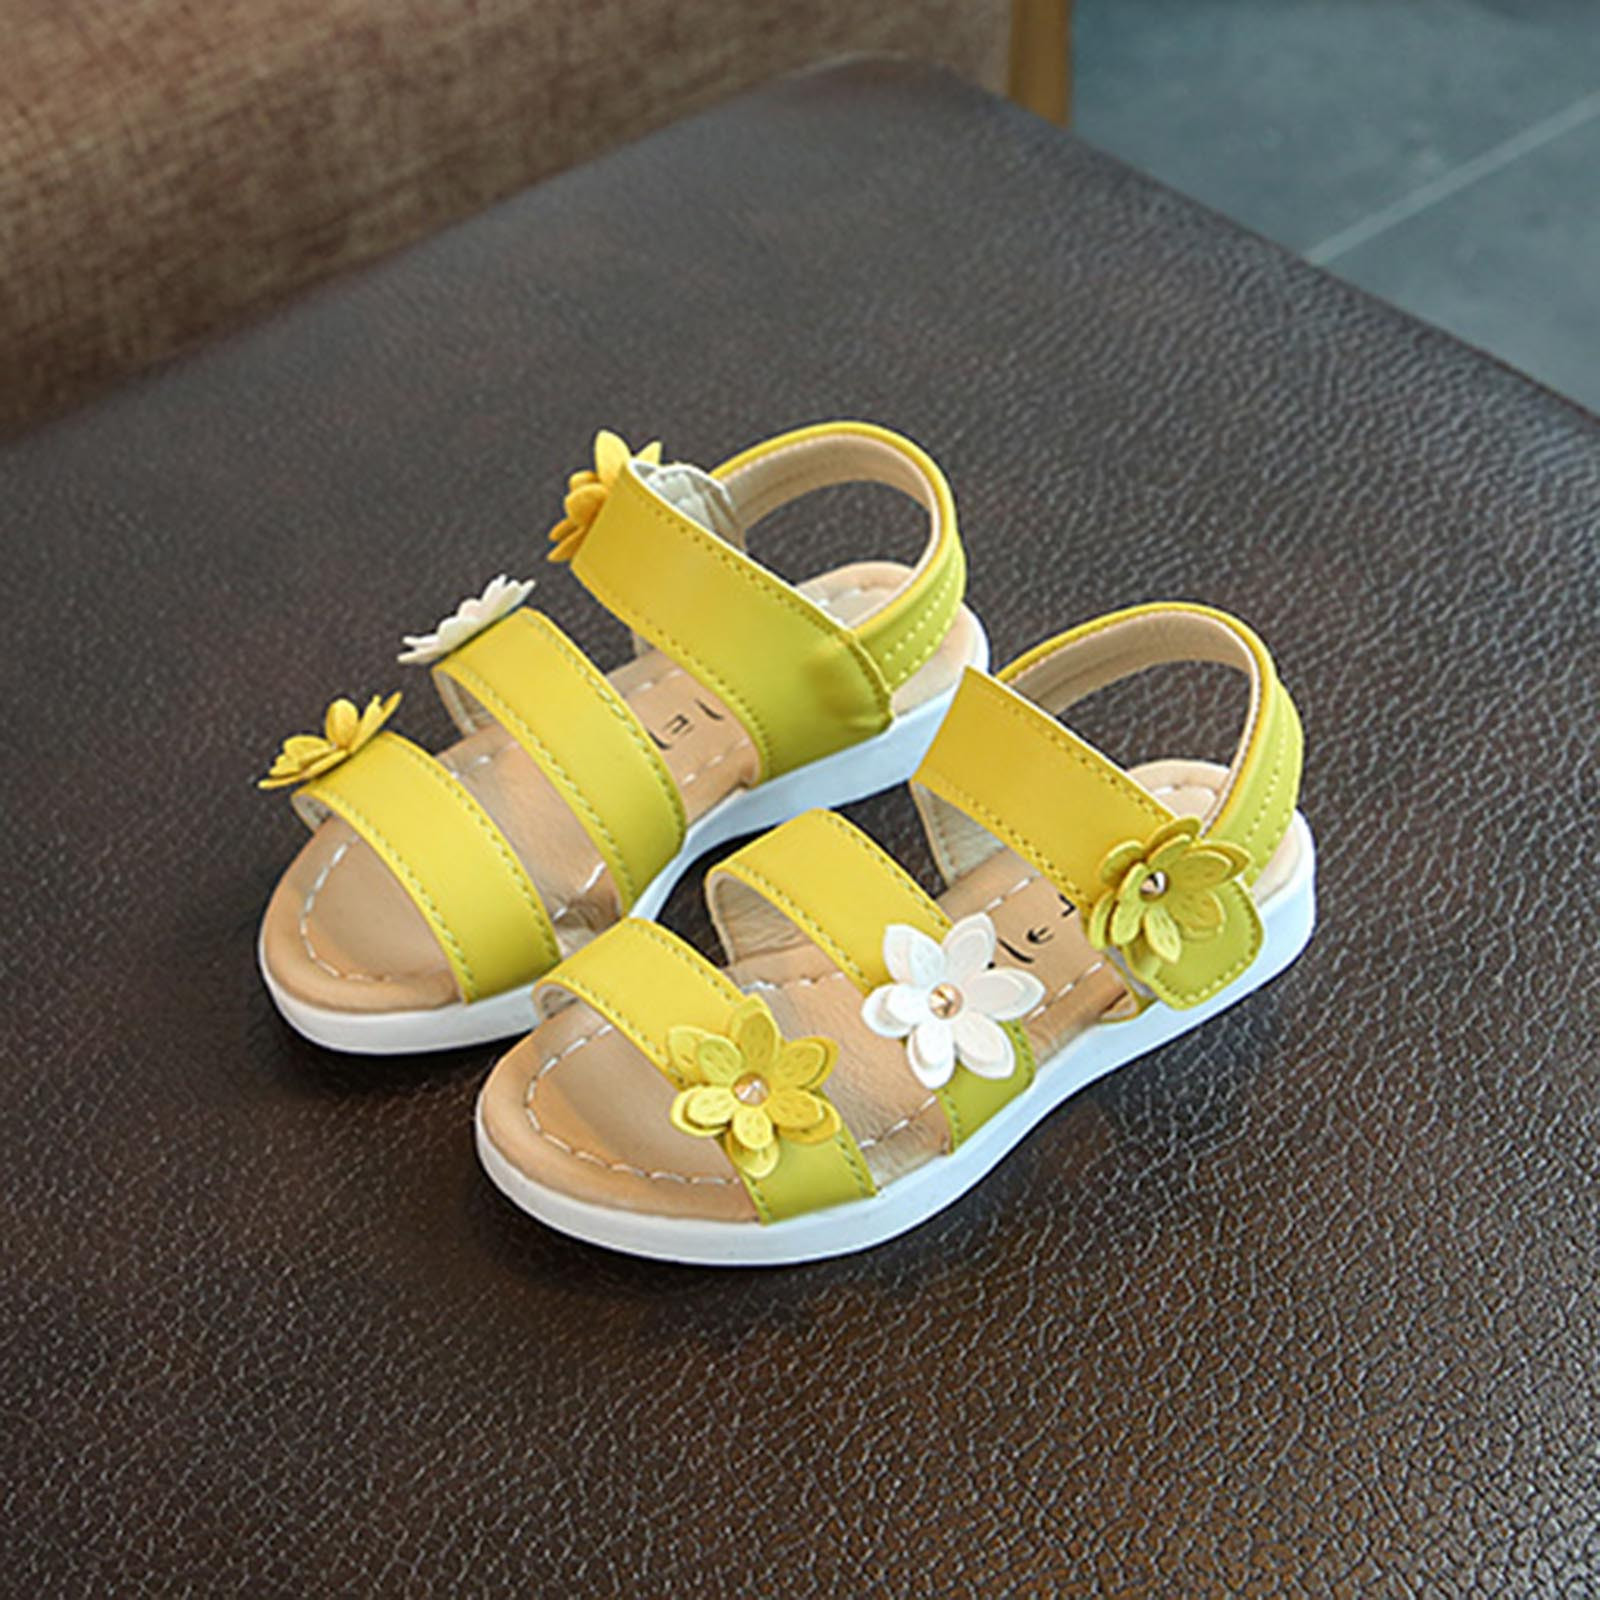 LoyisViDion Toddler Shoes Clearance Children Girls Shoes Sandals Princess Open-Toed Soft Bottom Flowers Roman Beach Shoes Yellow 9-9.5Years - image 4 of 6